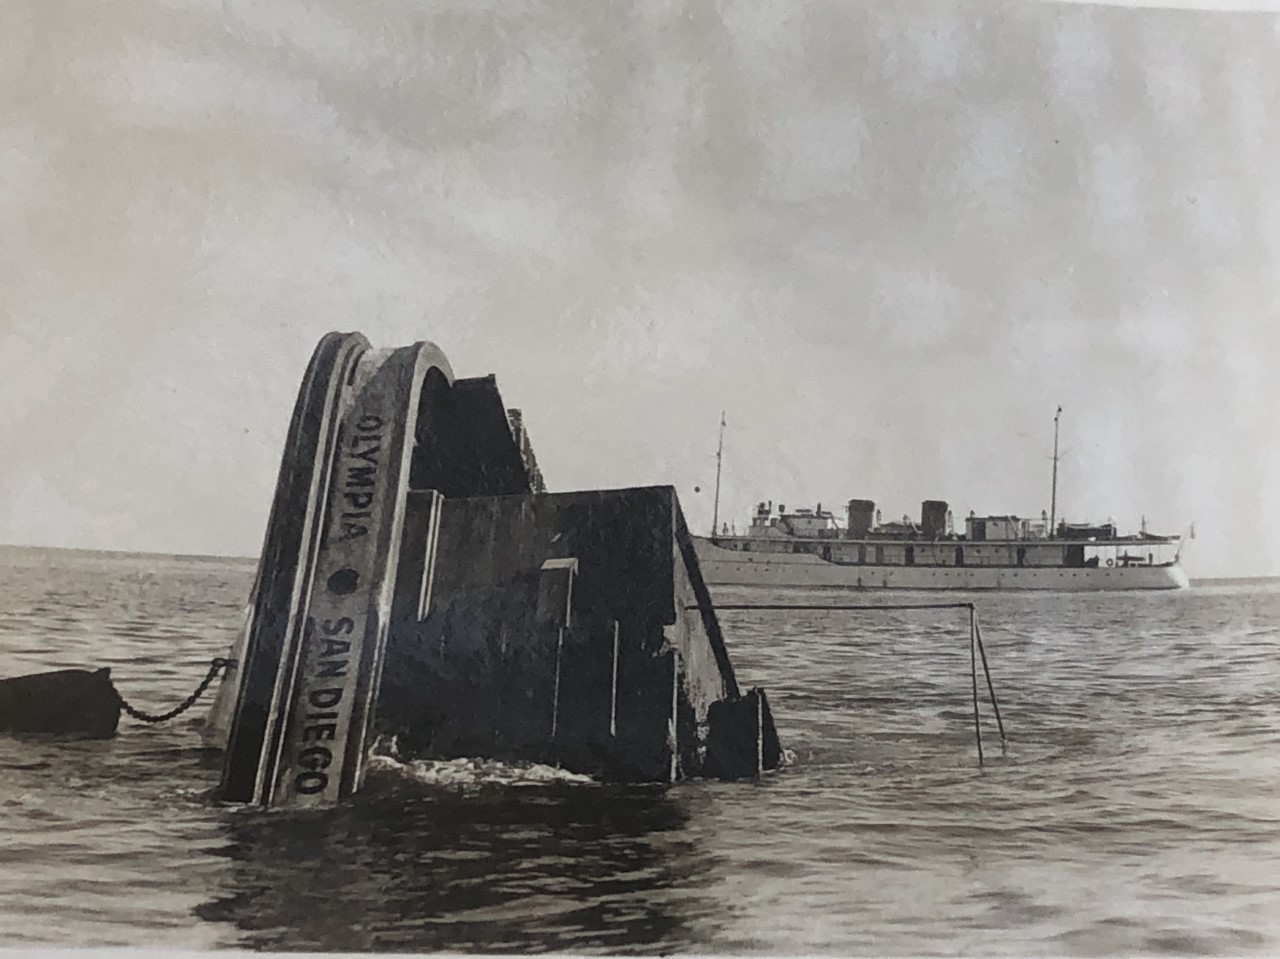 A photo of a ship sinking - taken from Hancock's collections